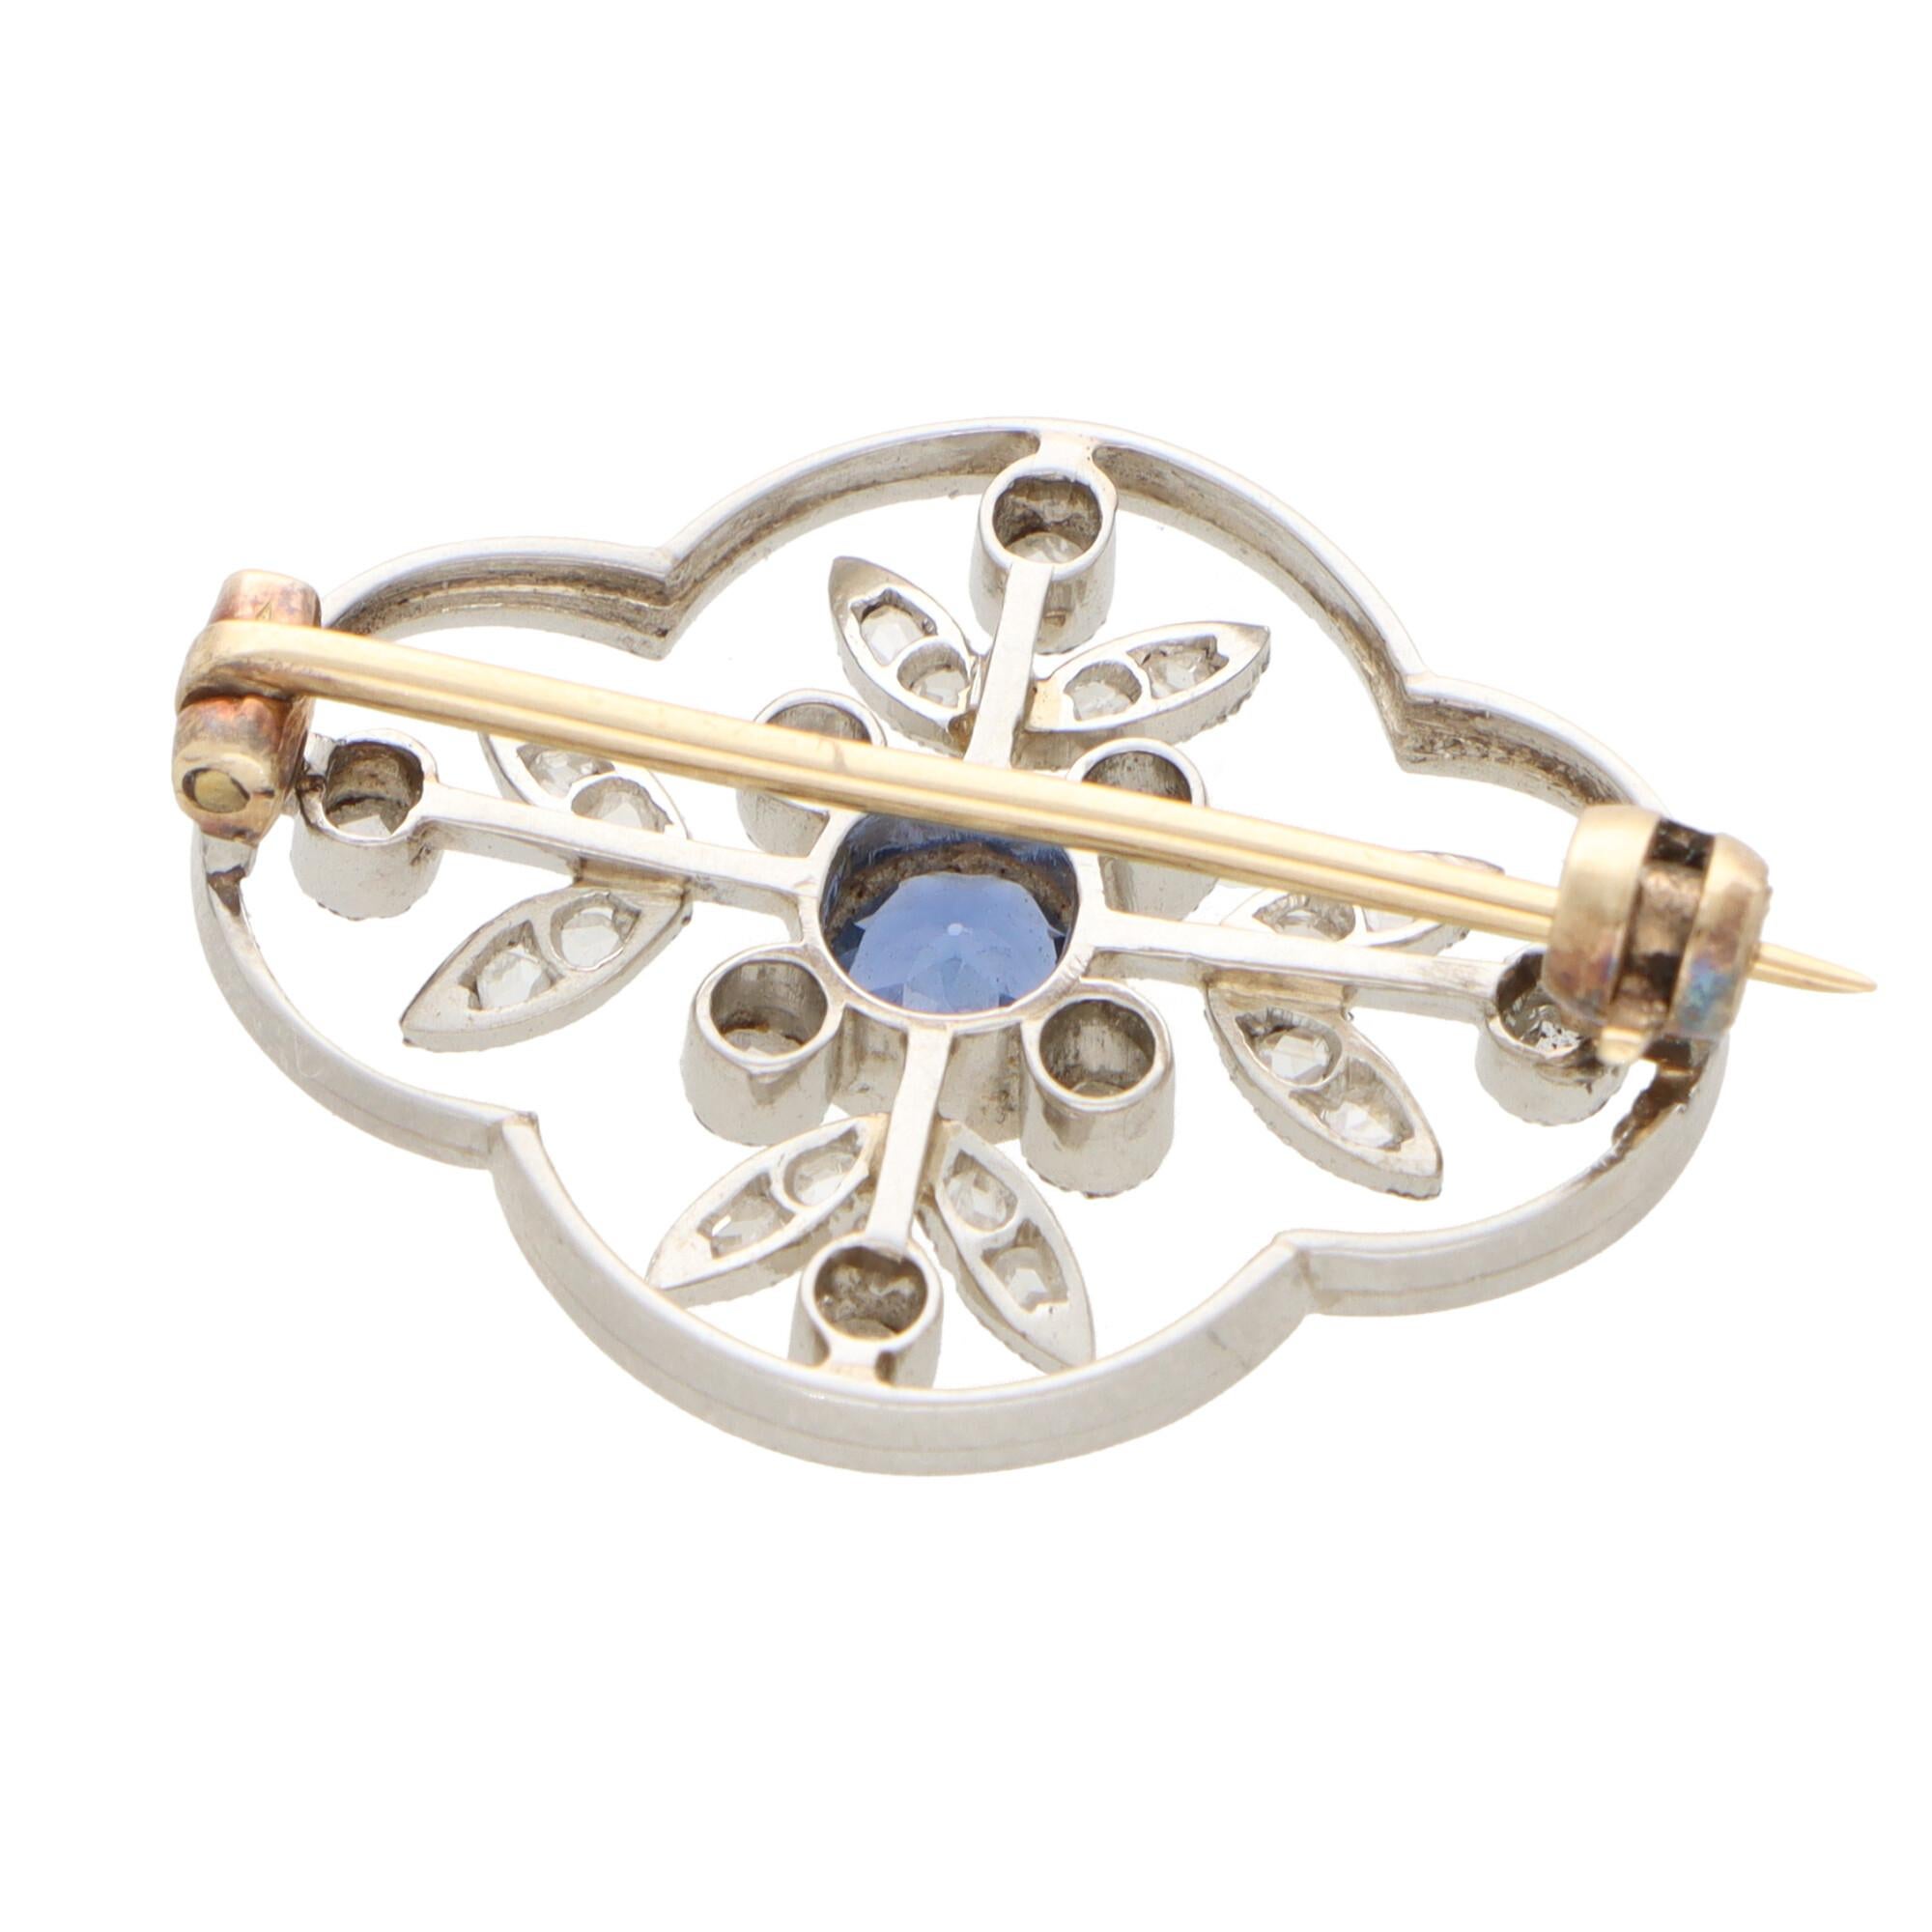 Rose Cut Art Deco Sapphire and Old Cut Diamond Floral Pin Brooch in Platinum and Gold